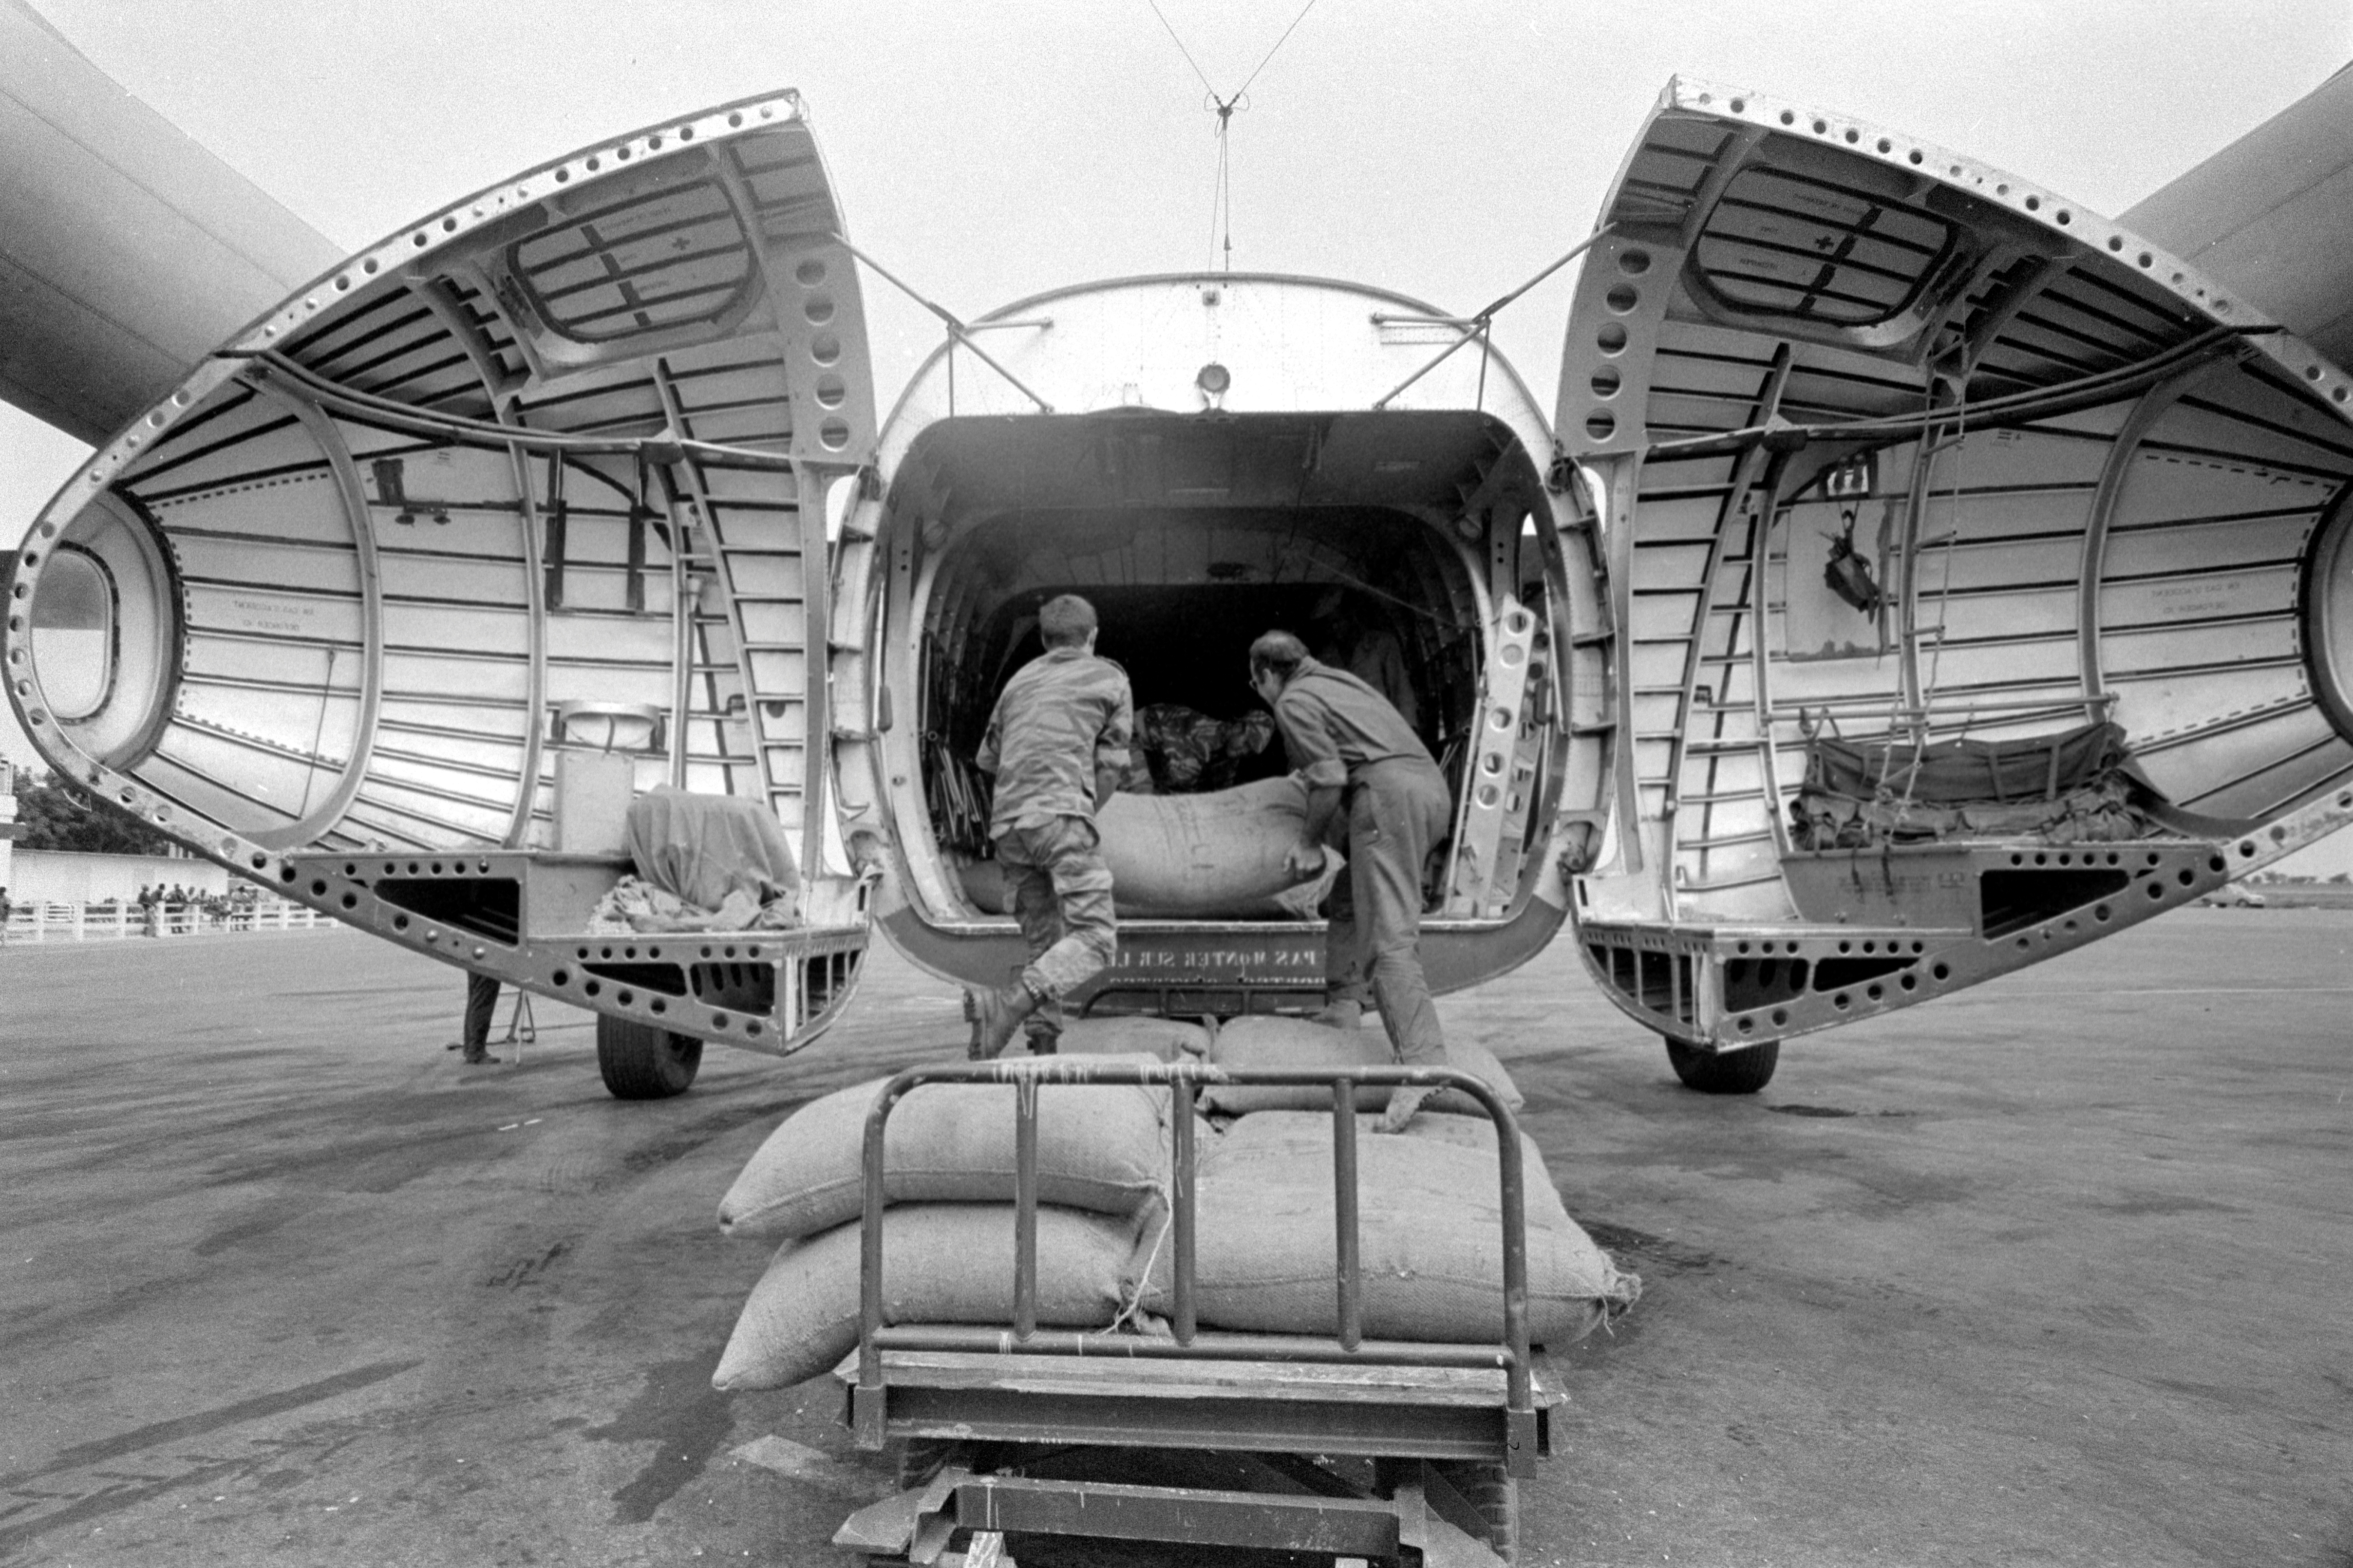 1973, Sahel, Africa - Drought in Upper Volta. Bags of sorghum donated to UN/FAO World Food Programme by U.S.A are being unloaded from a plane in Central Upper Volta. (Image courtesy of FAO)